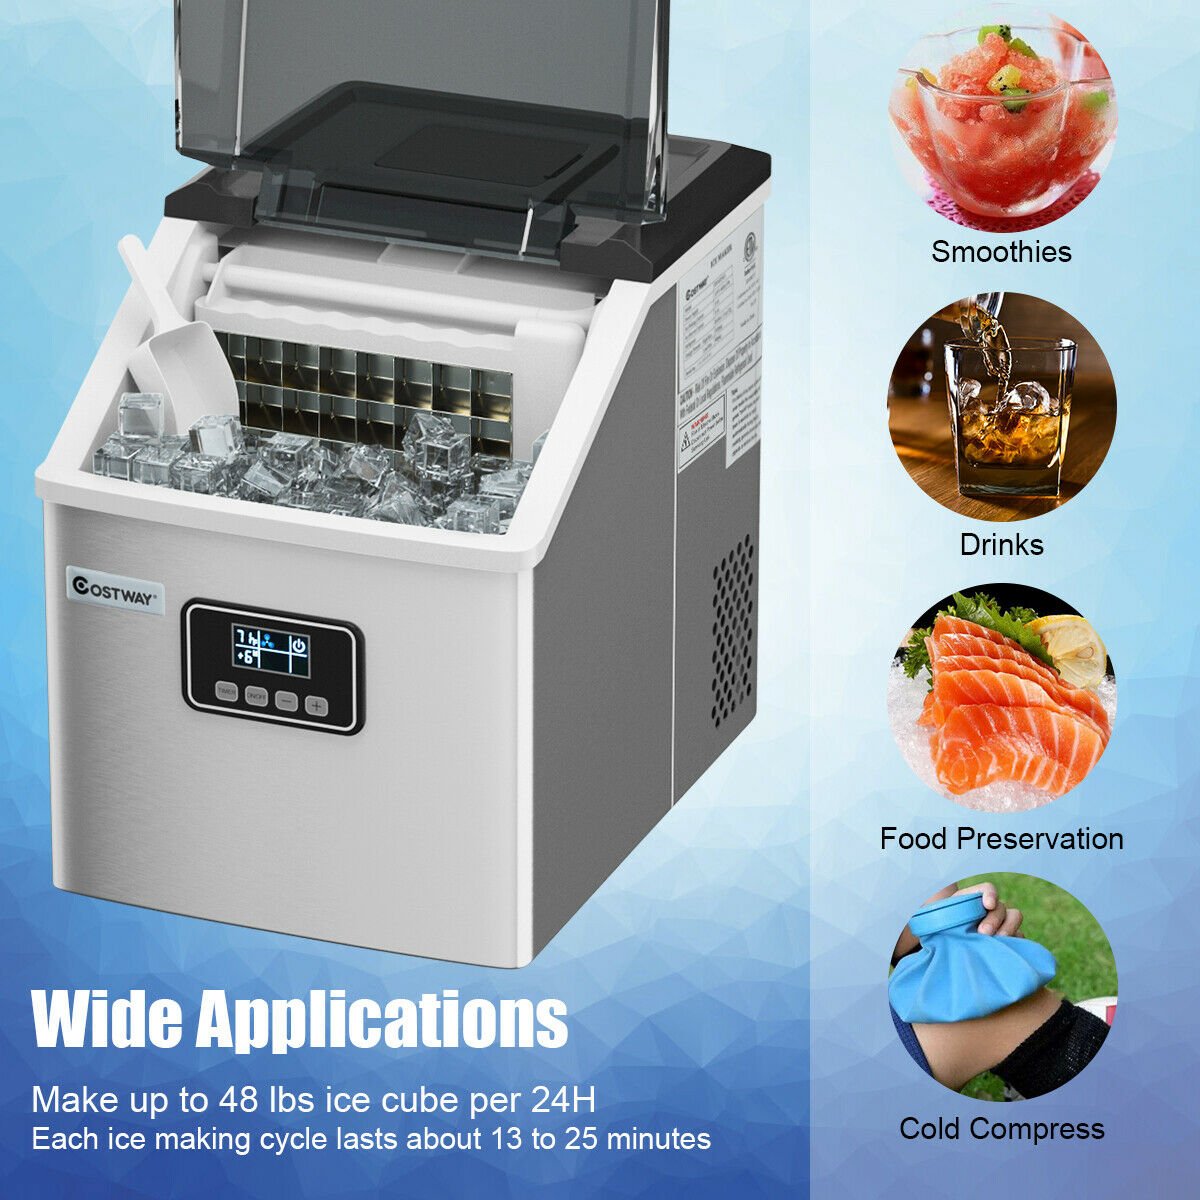 48 lbs Stainless Self-Clean Ice Maker with LCD Display, Silver - Gallery Canada